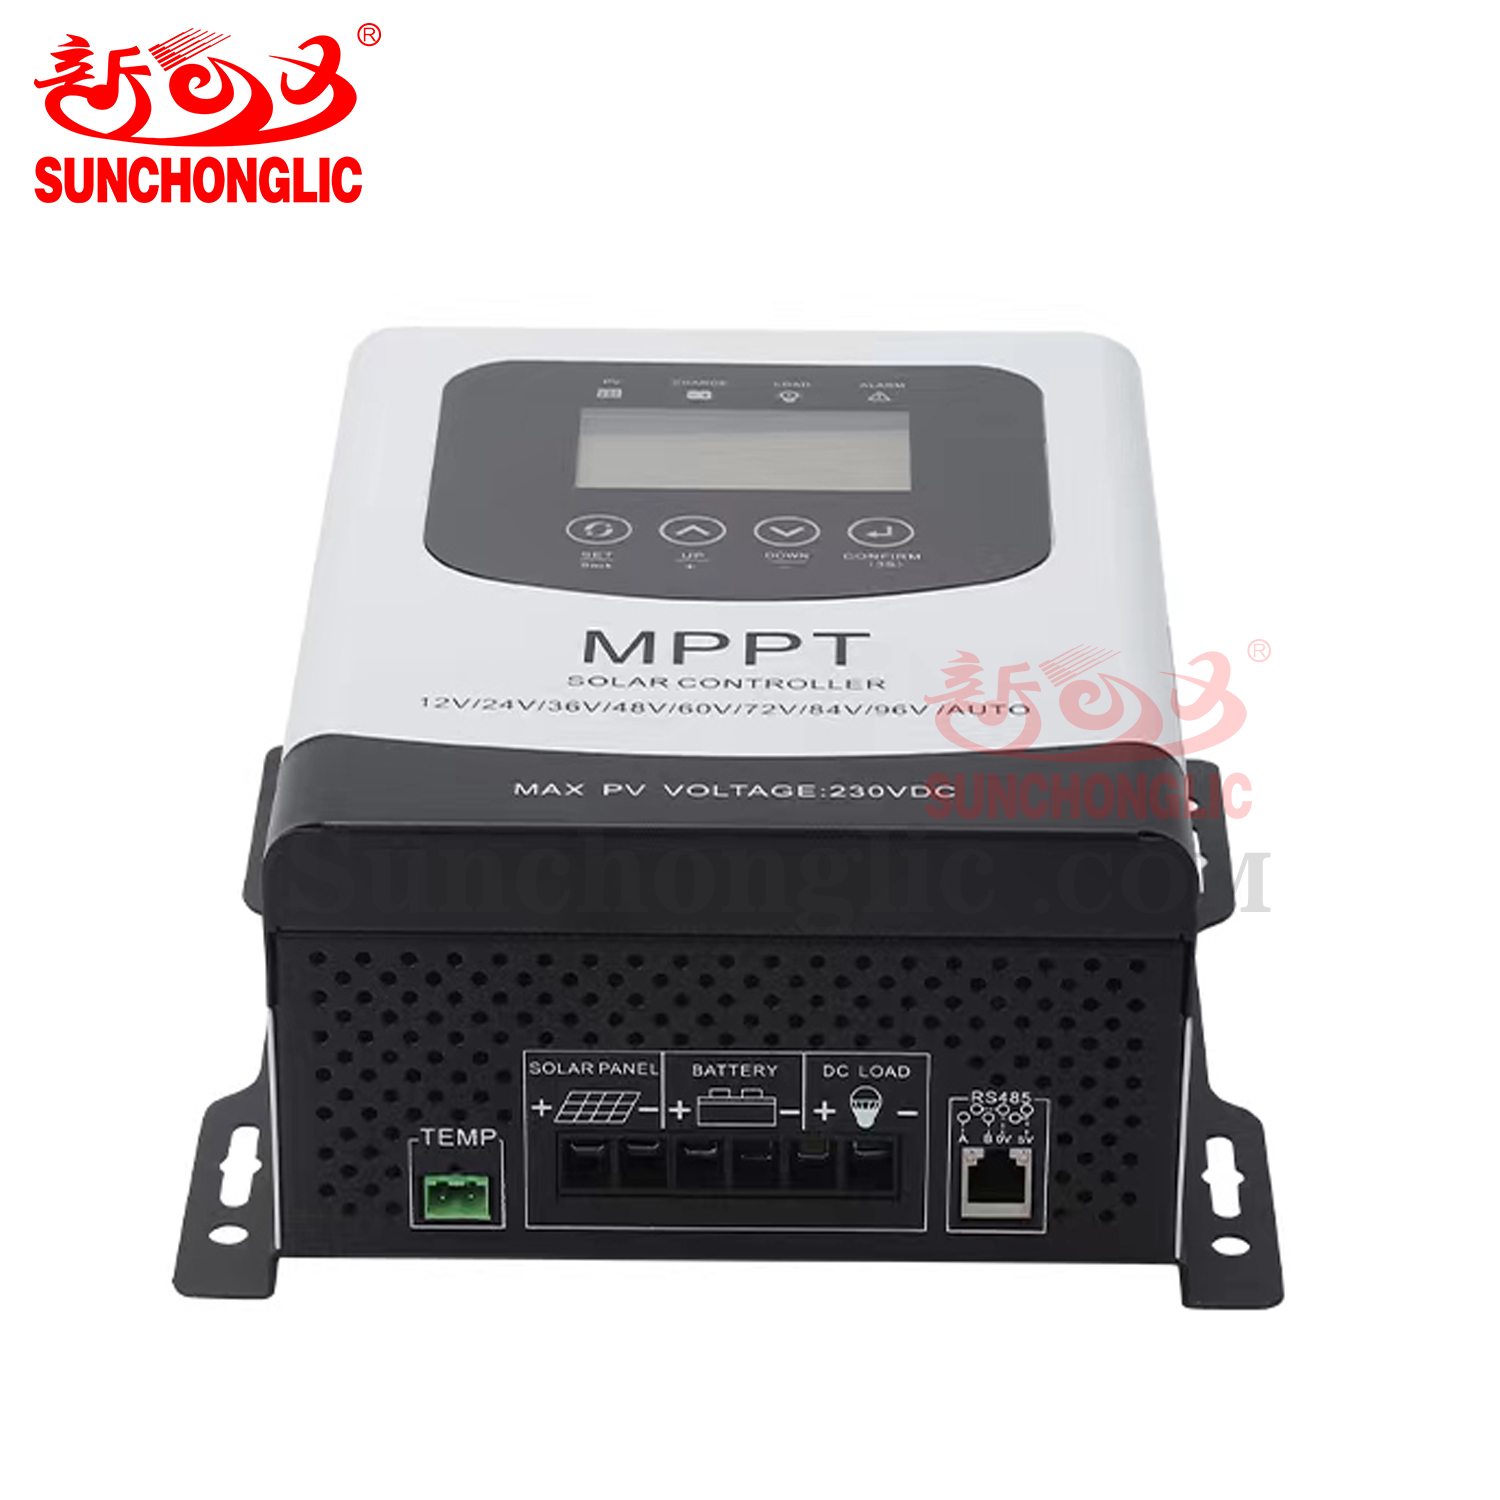 MPPT Solar Charge Controller - MPPT Series